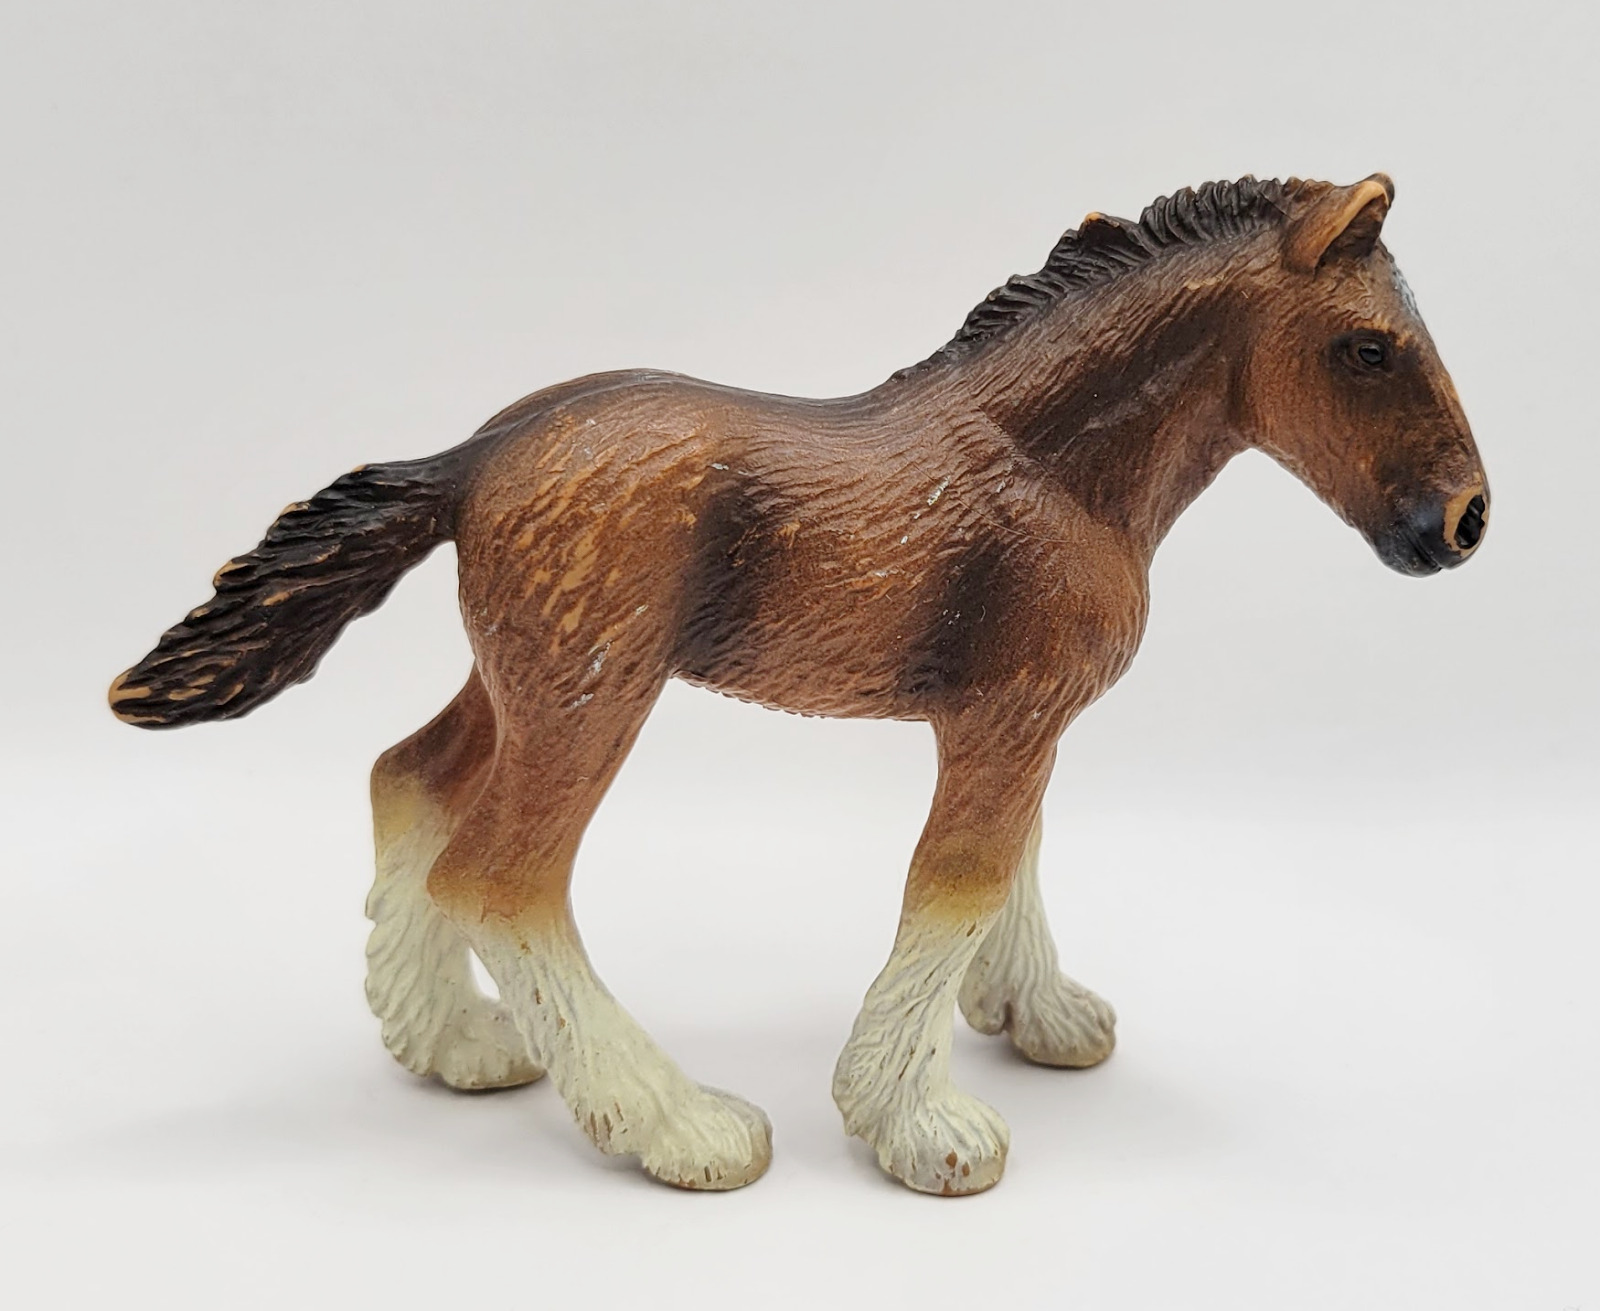 2002 Schleich Germany Brown Foal Figurine Horse Figure Clydesdale Toy